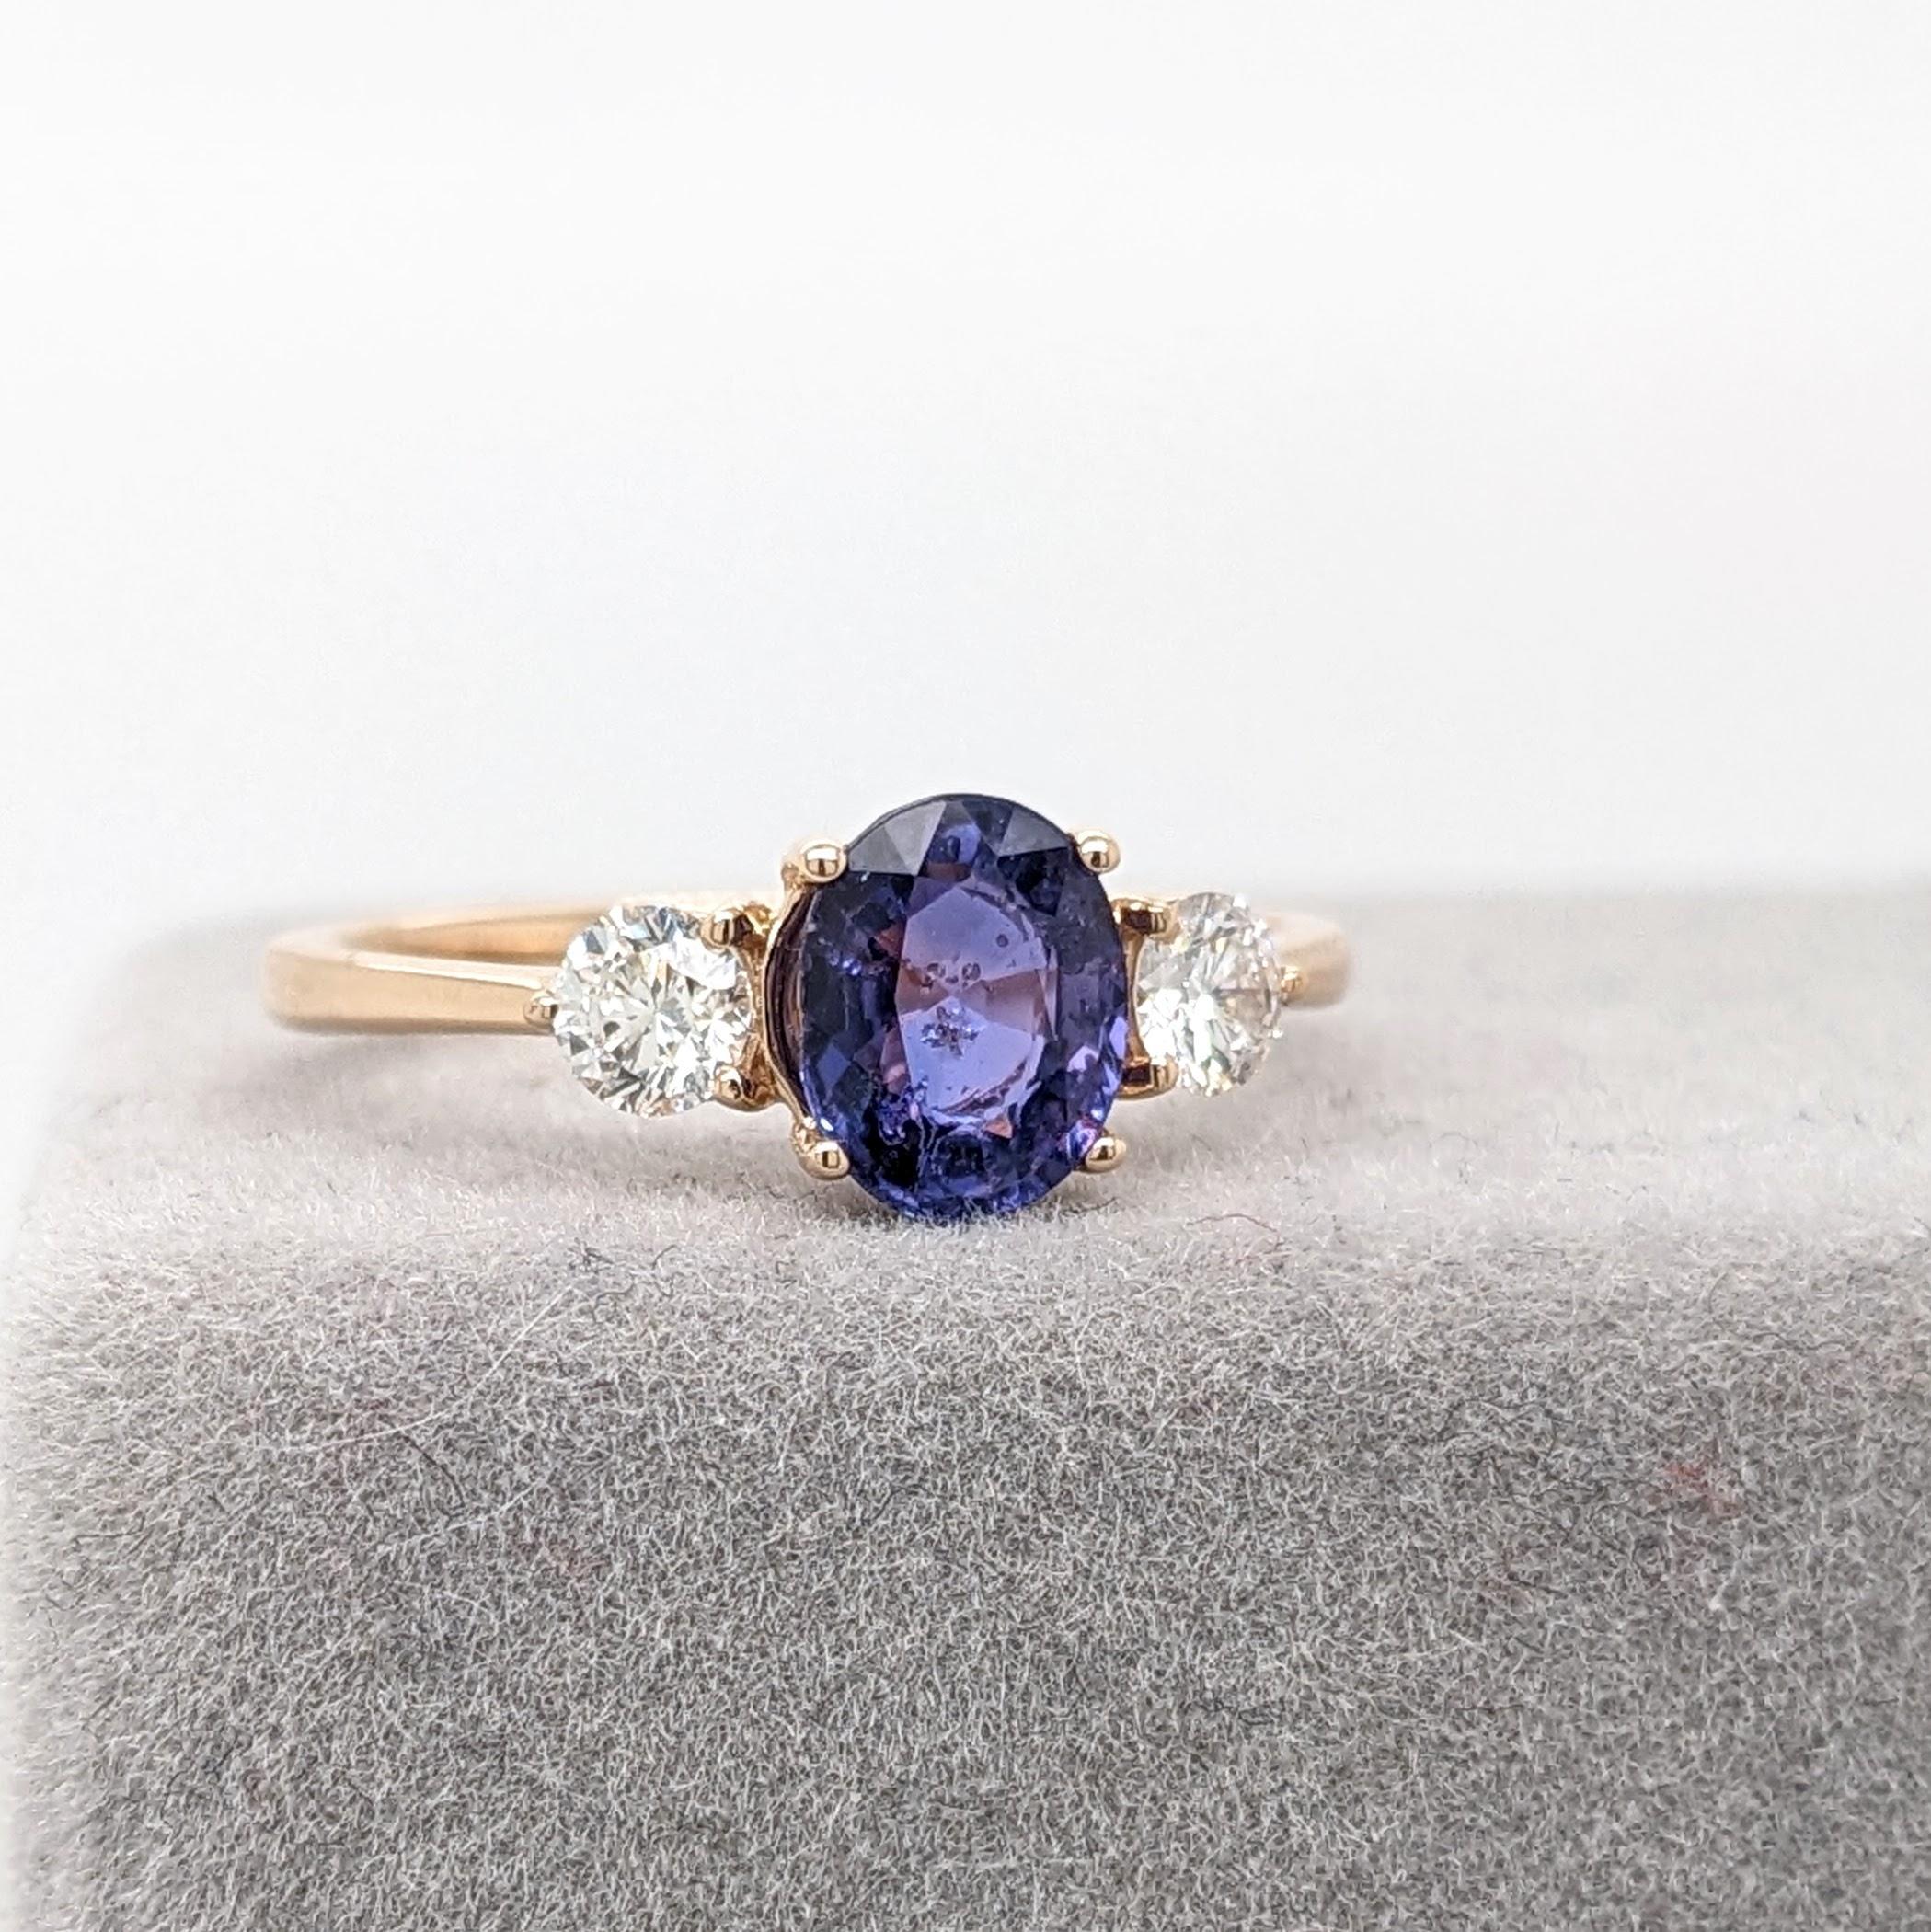 This ring features a beautiful oval cut purple sapphire in a cute NNJ Designs ring setting with 2 natural round diamond accents on both sides all set in 14k yellow gold.

Specifications

Item Type: Ring
Centre Stone: Purple Sapphire
Treatment: